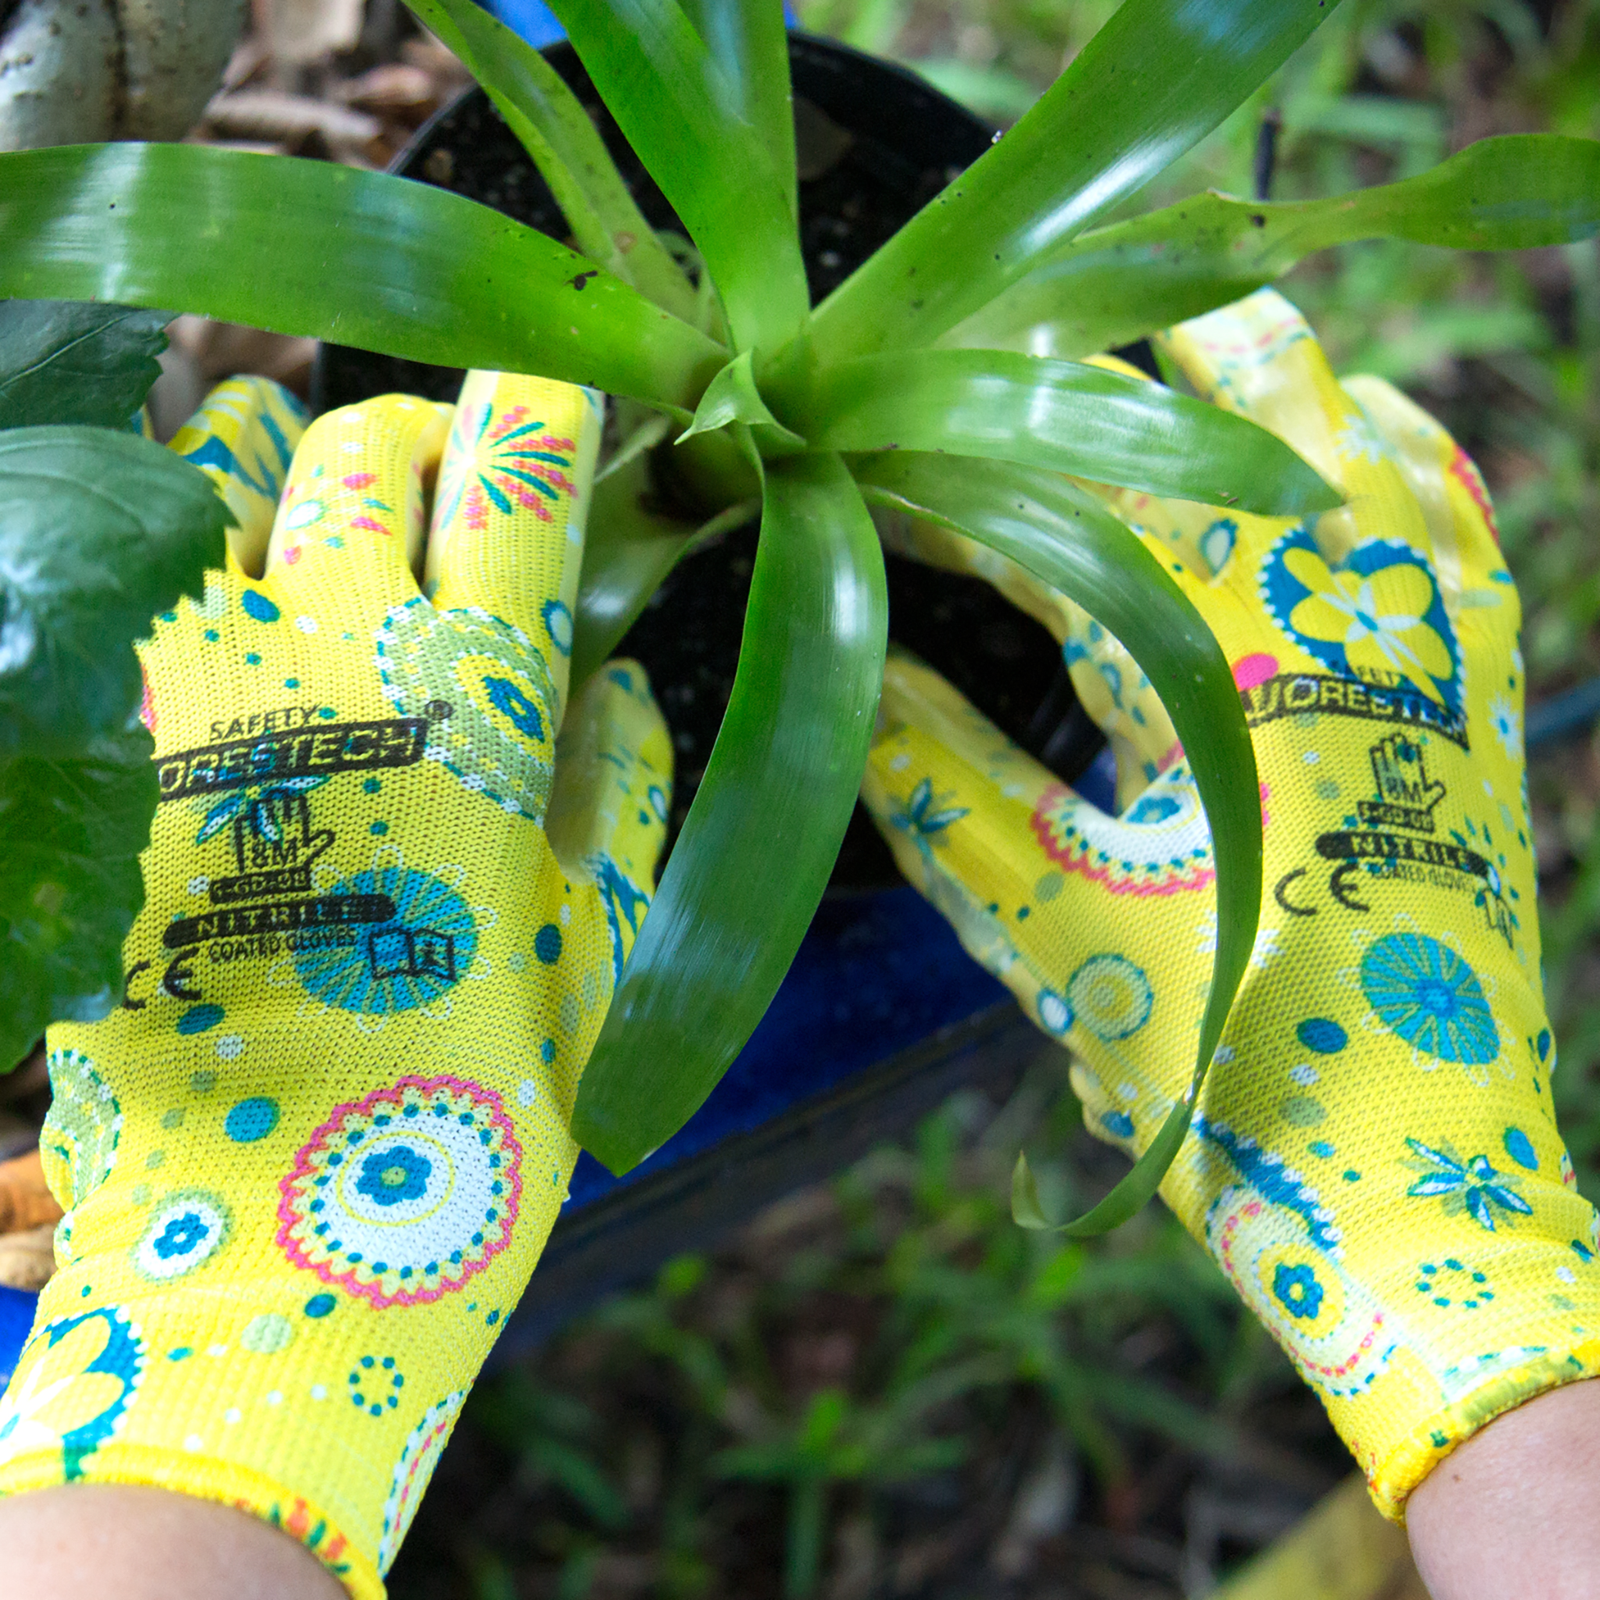 Hands wearing the JORESTECH gardening gloves with nitrile dipped palms. The person is removing a bromeliad plant from a flower pot  JORESTECH garden gloves on top